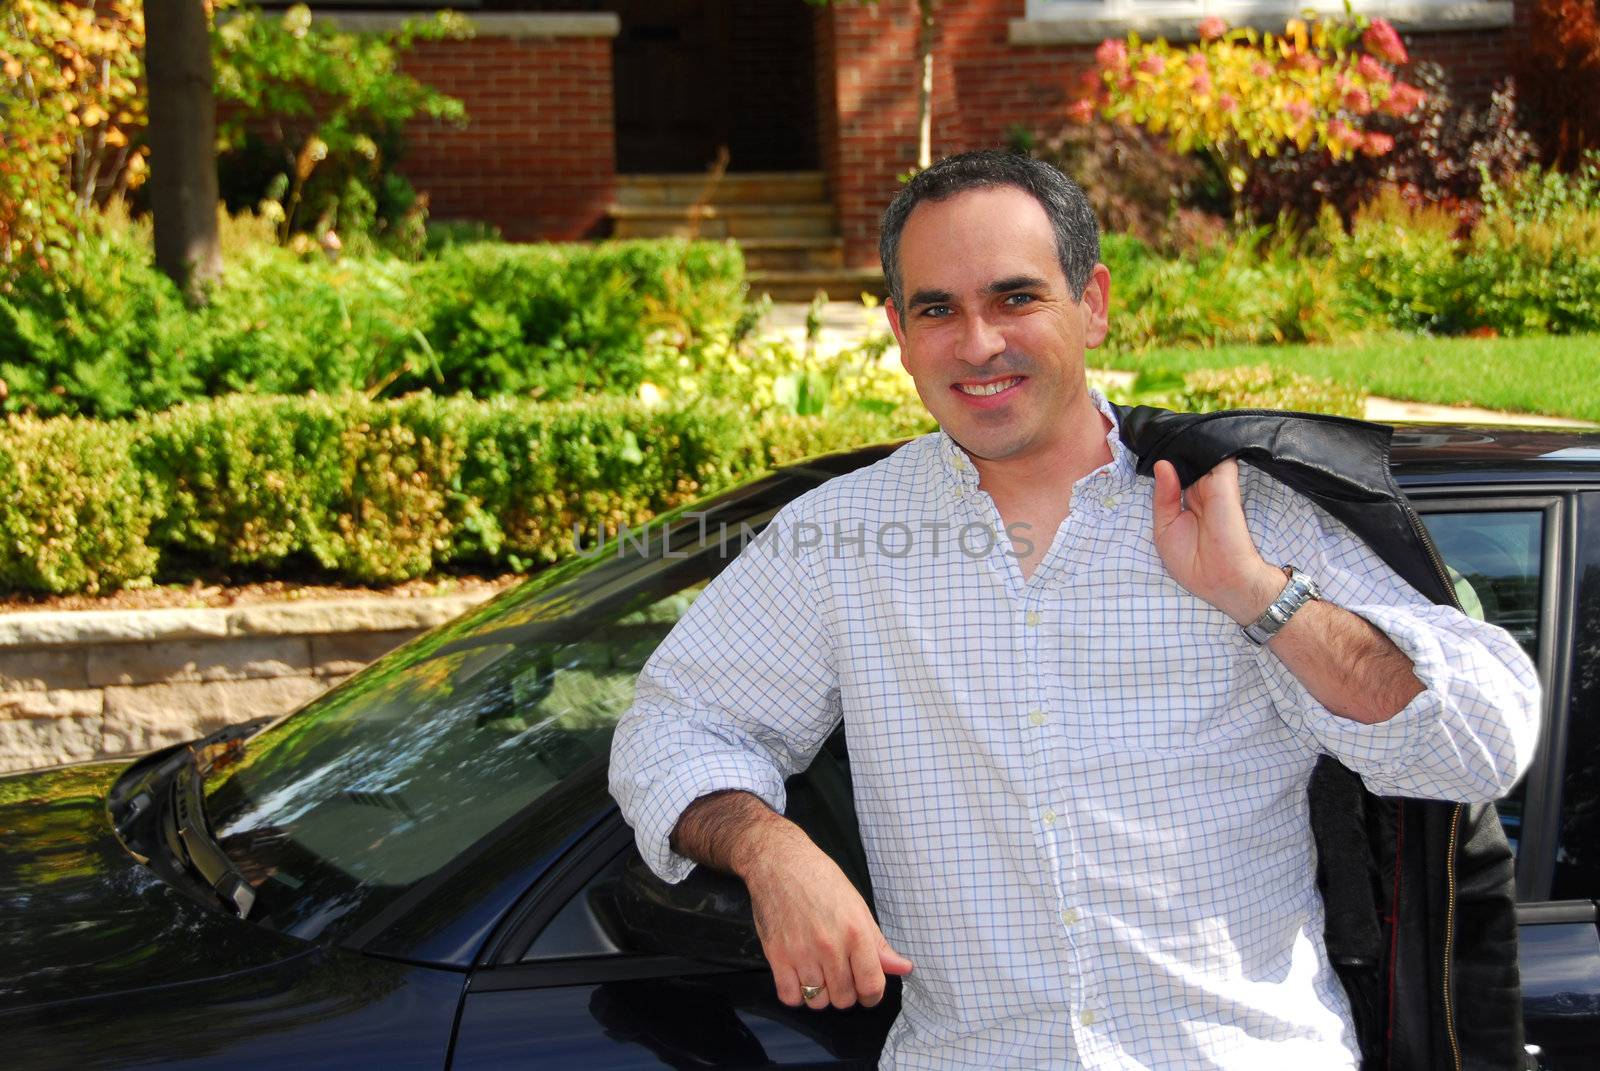 A man standing outside leaning on his car in front of his house